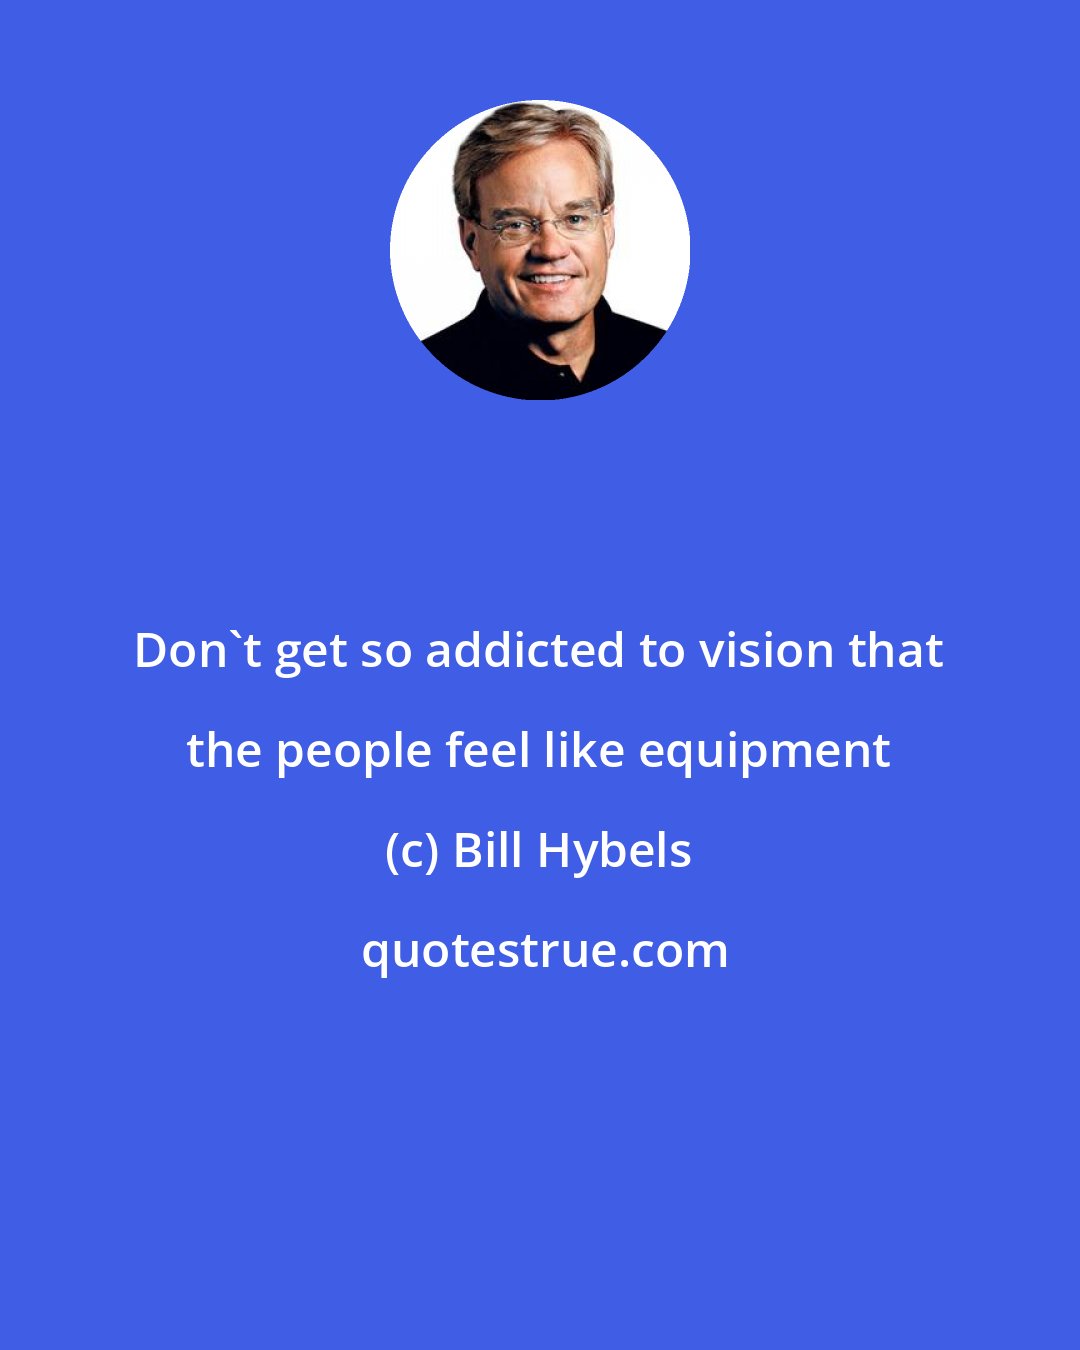 Bill Hybels: Don't get so addicted to vision that the people feel like equipment